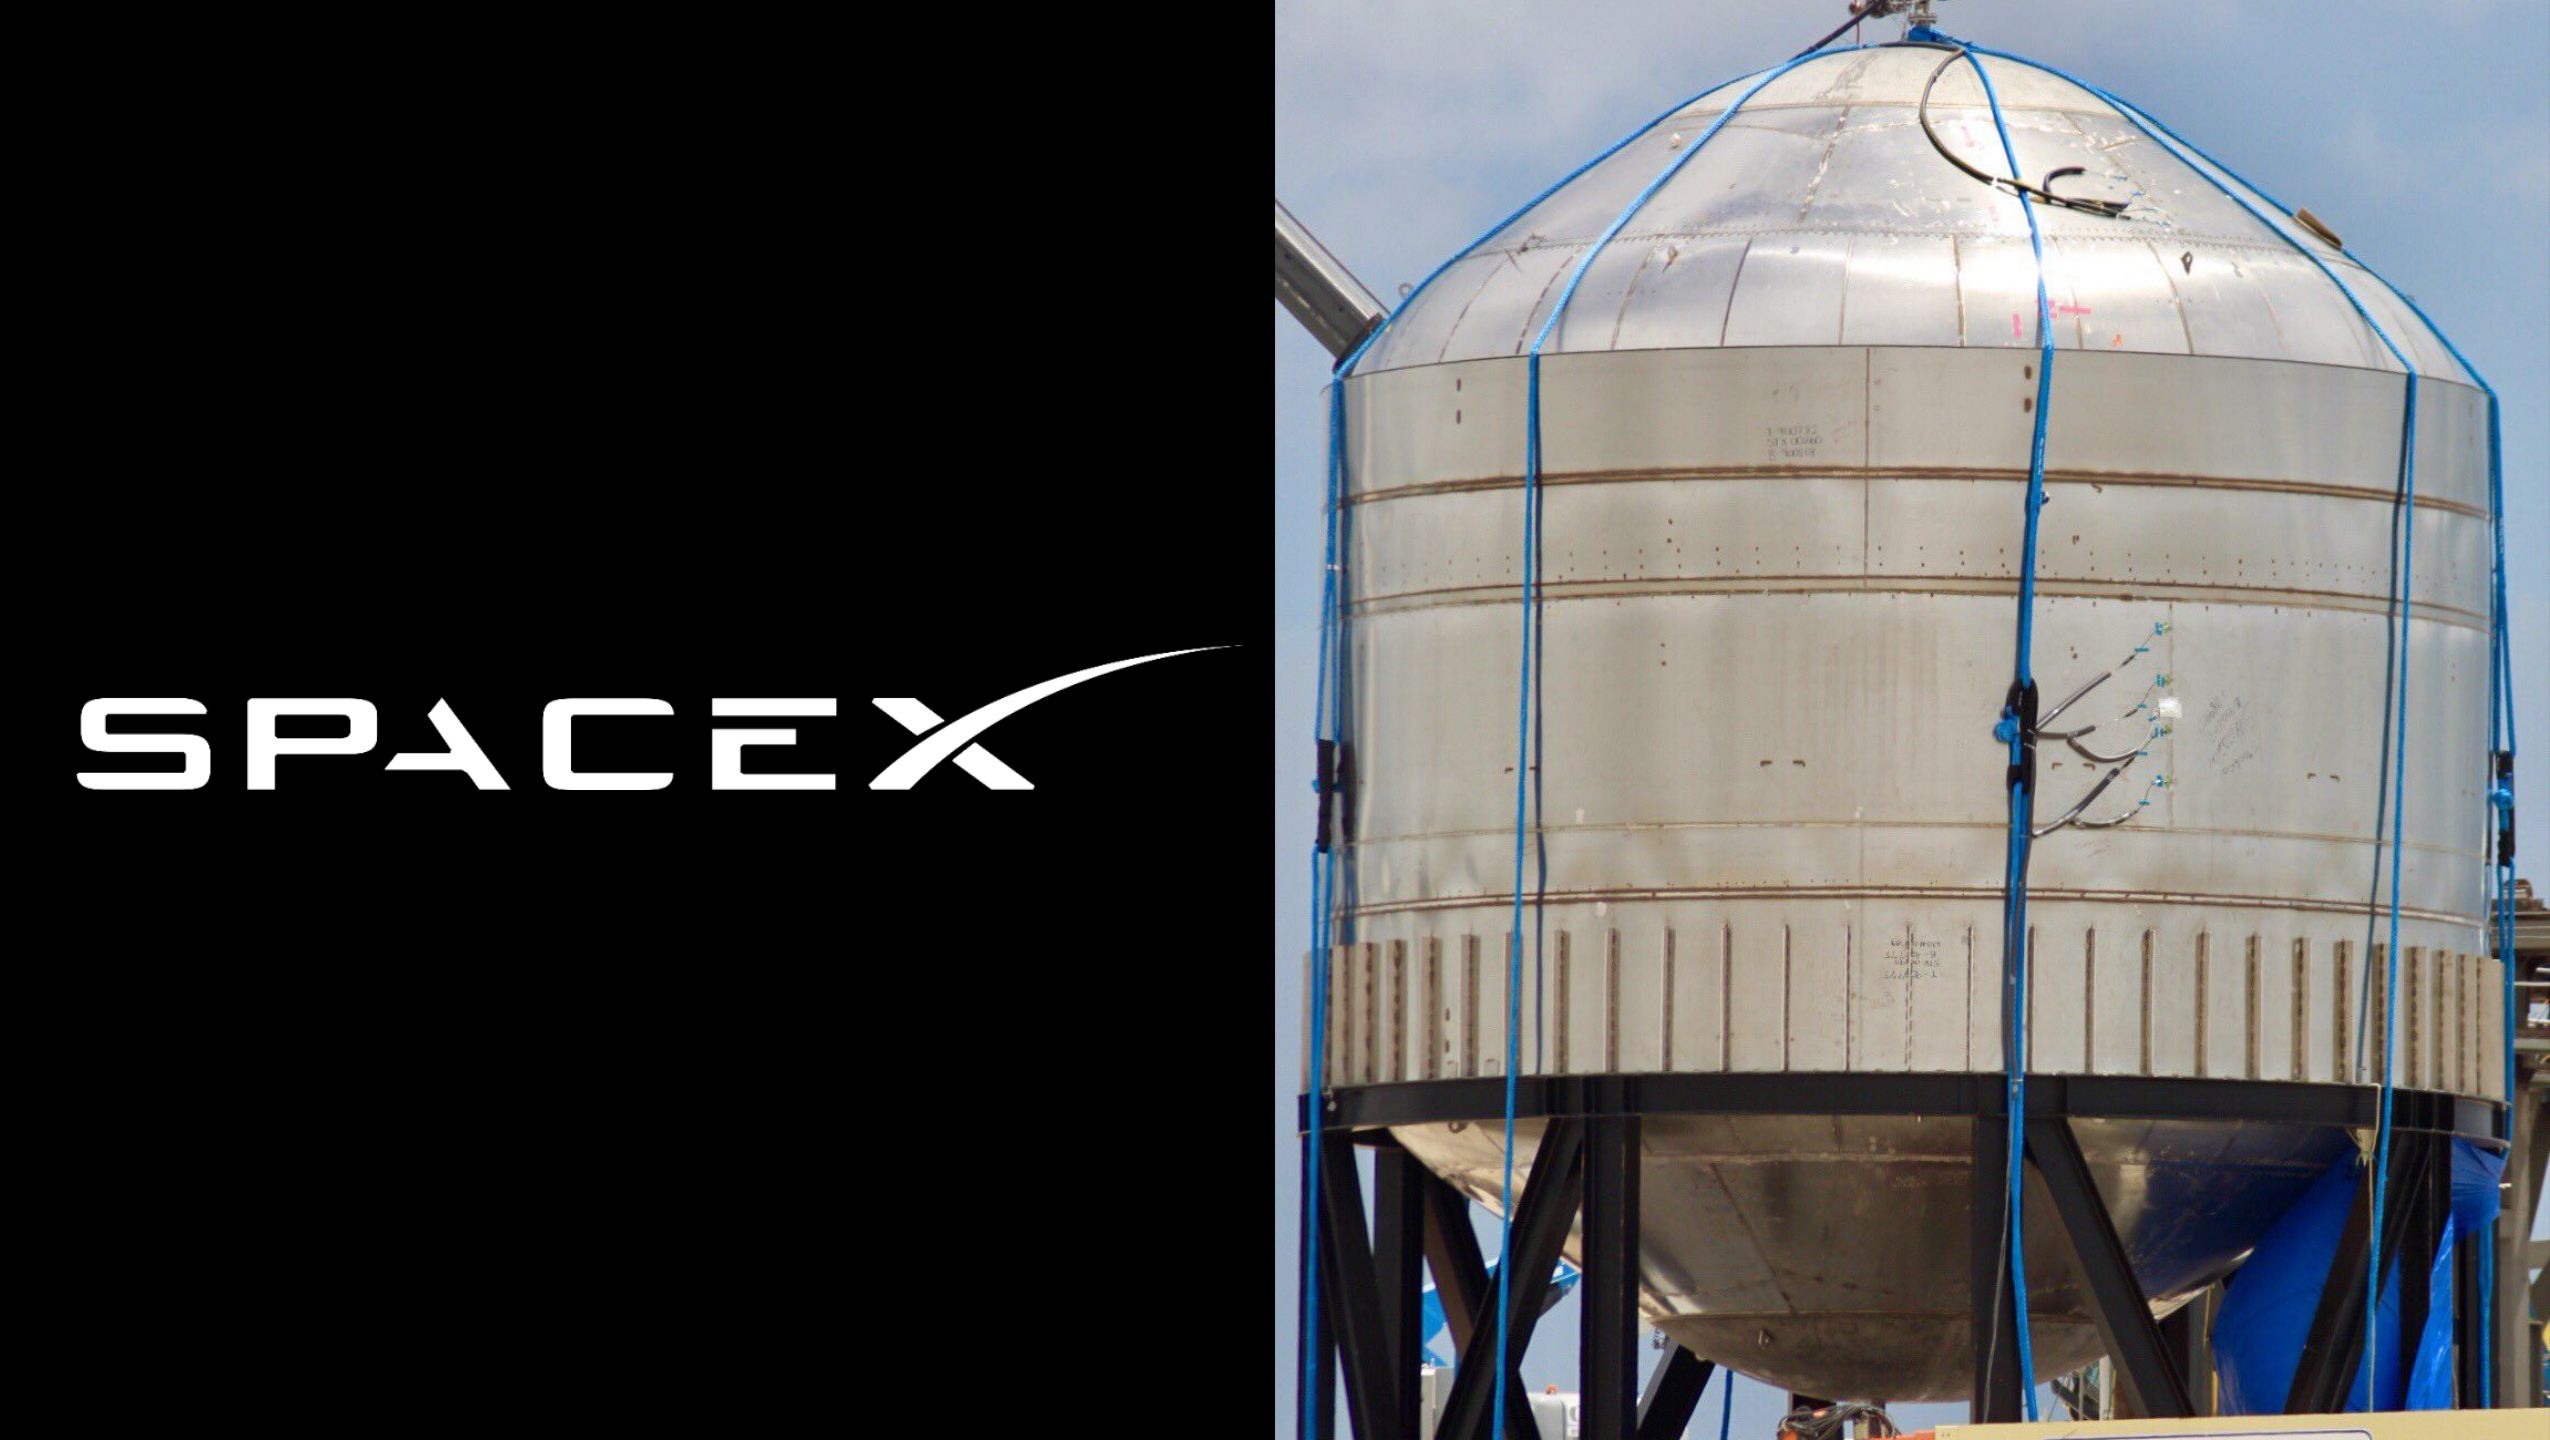 SpaceX is ready to conduct another round of Starship SN7 tests